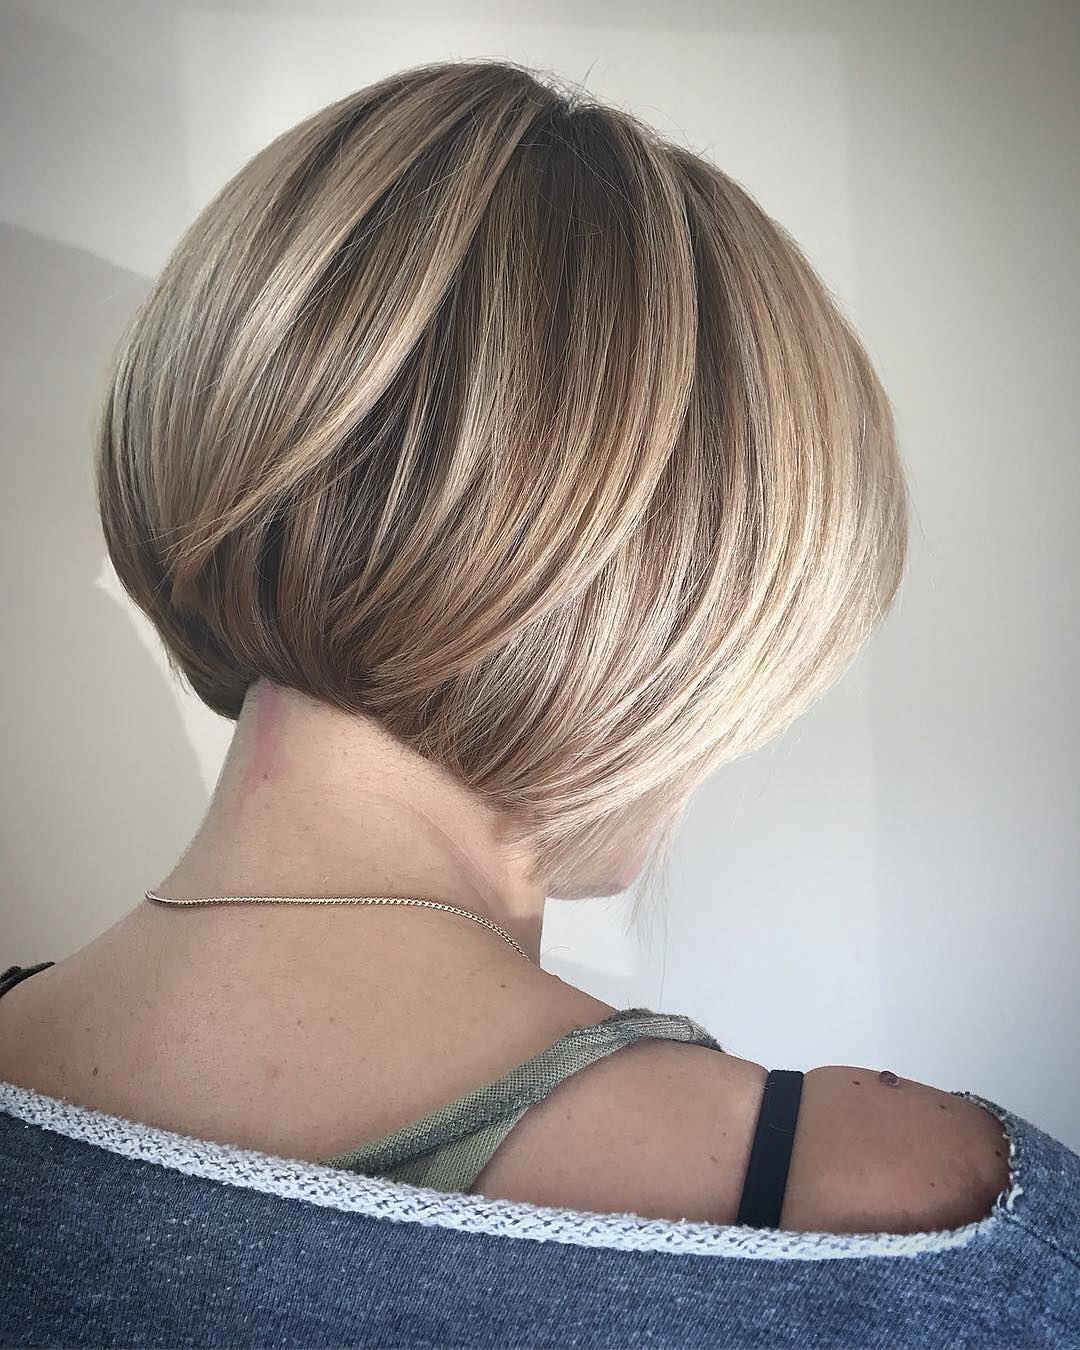 Top 10 Best Short Bob Hairstyles for Summer, Short Haircuts 2020